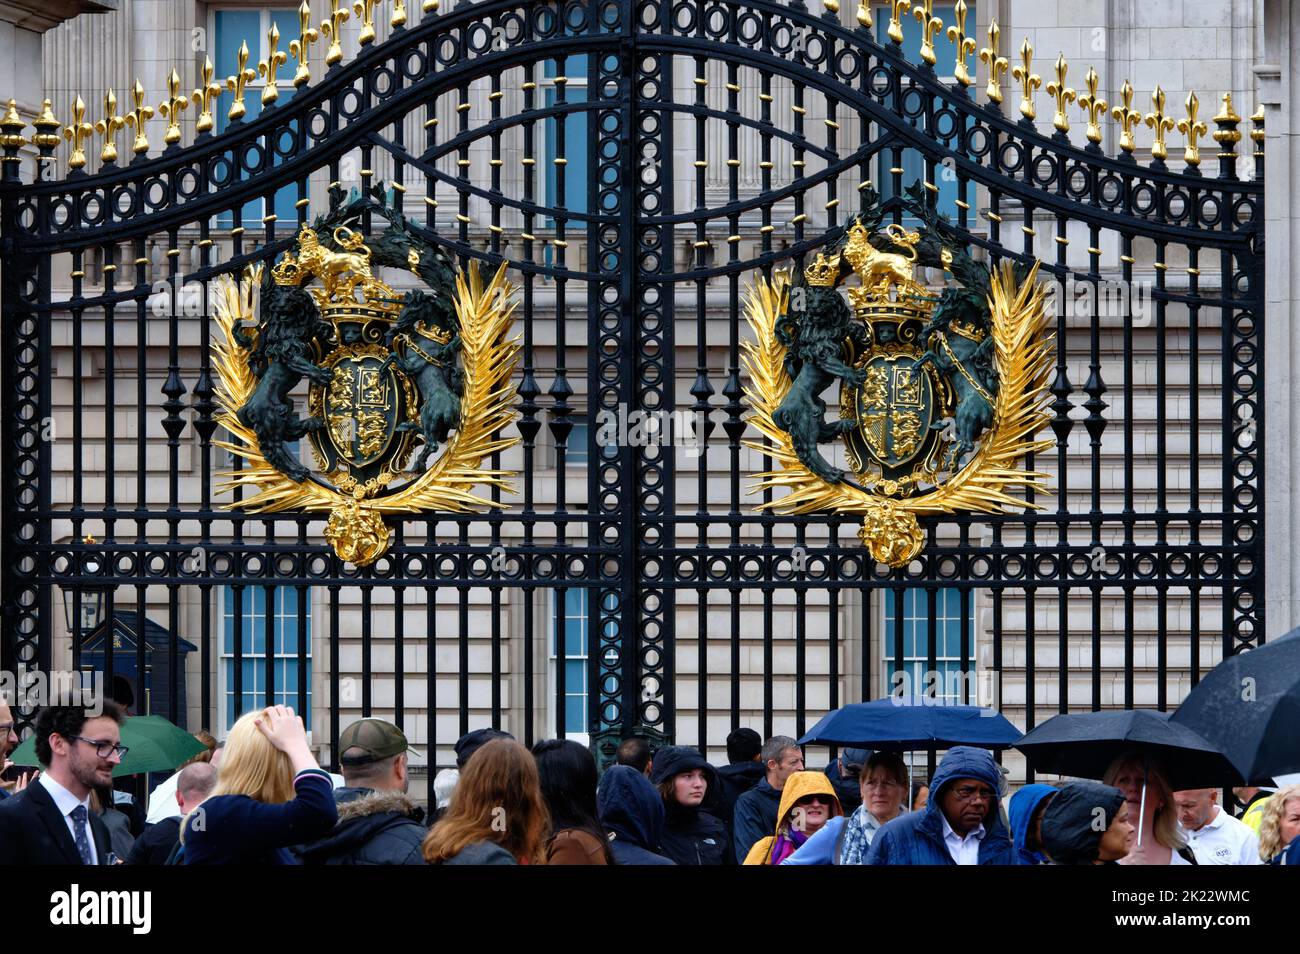 Royal crests on the gates of Buckingham Palace over the heads of vistors and mourners following the death of Queen Elizabeth II, London Stock Photo